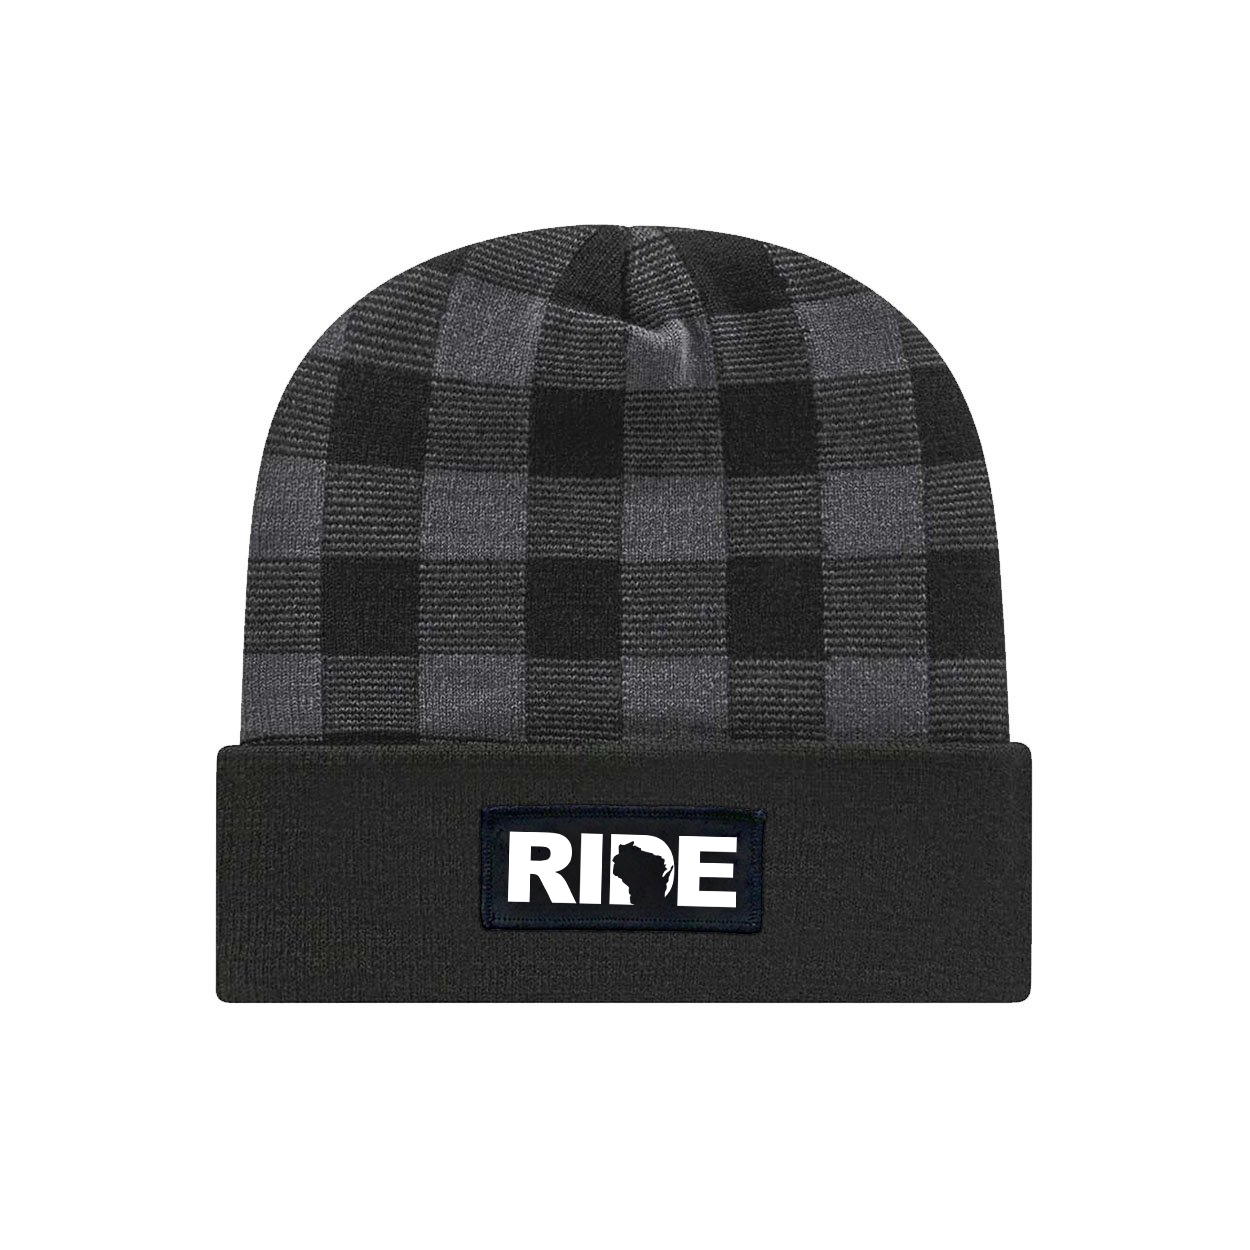 Ride Wisconsin Night Out Woven Patch Roll Up Plaid Beanie Black/Heather Gray (White Logo)